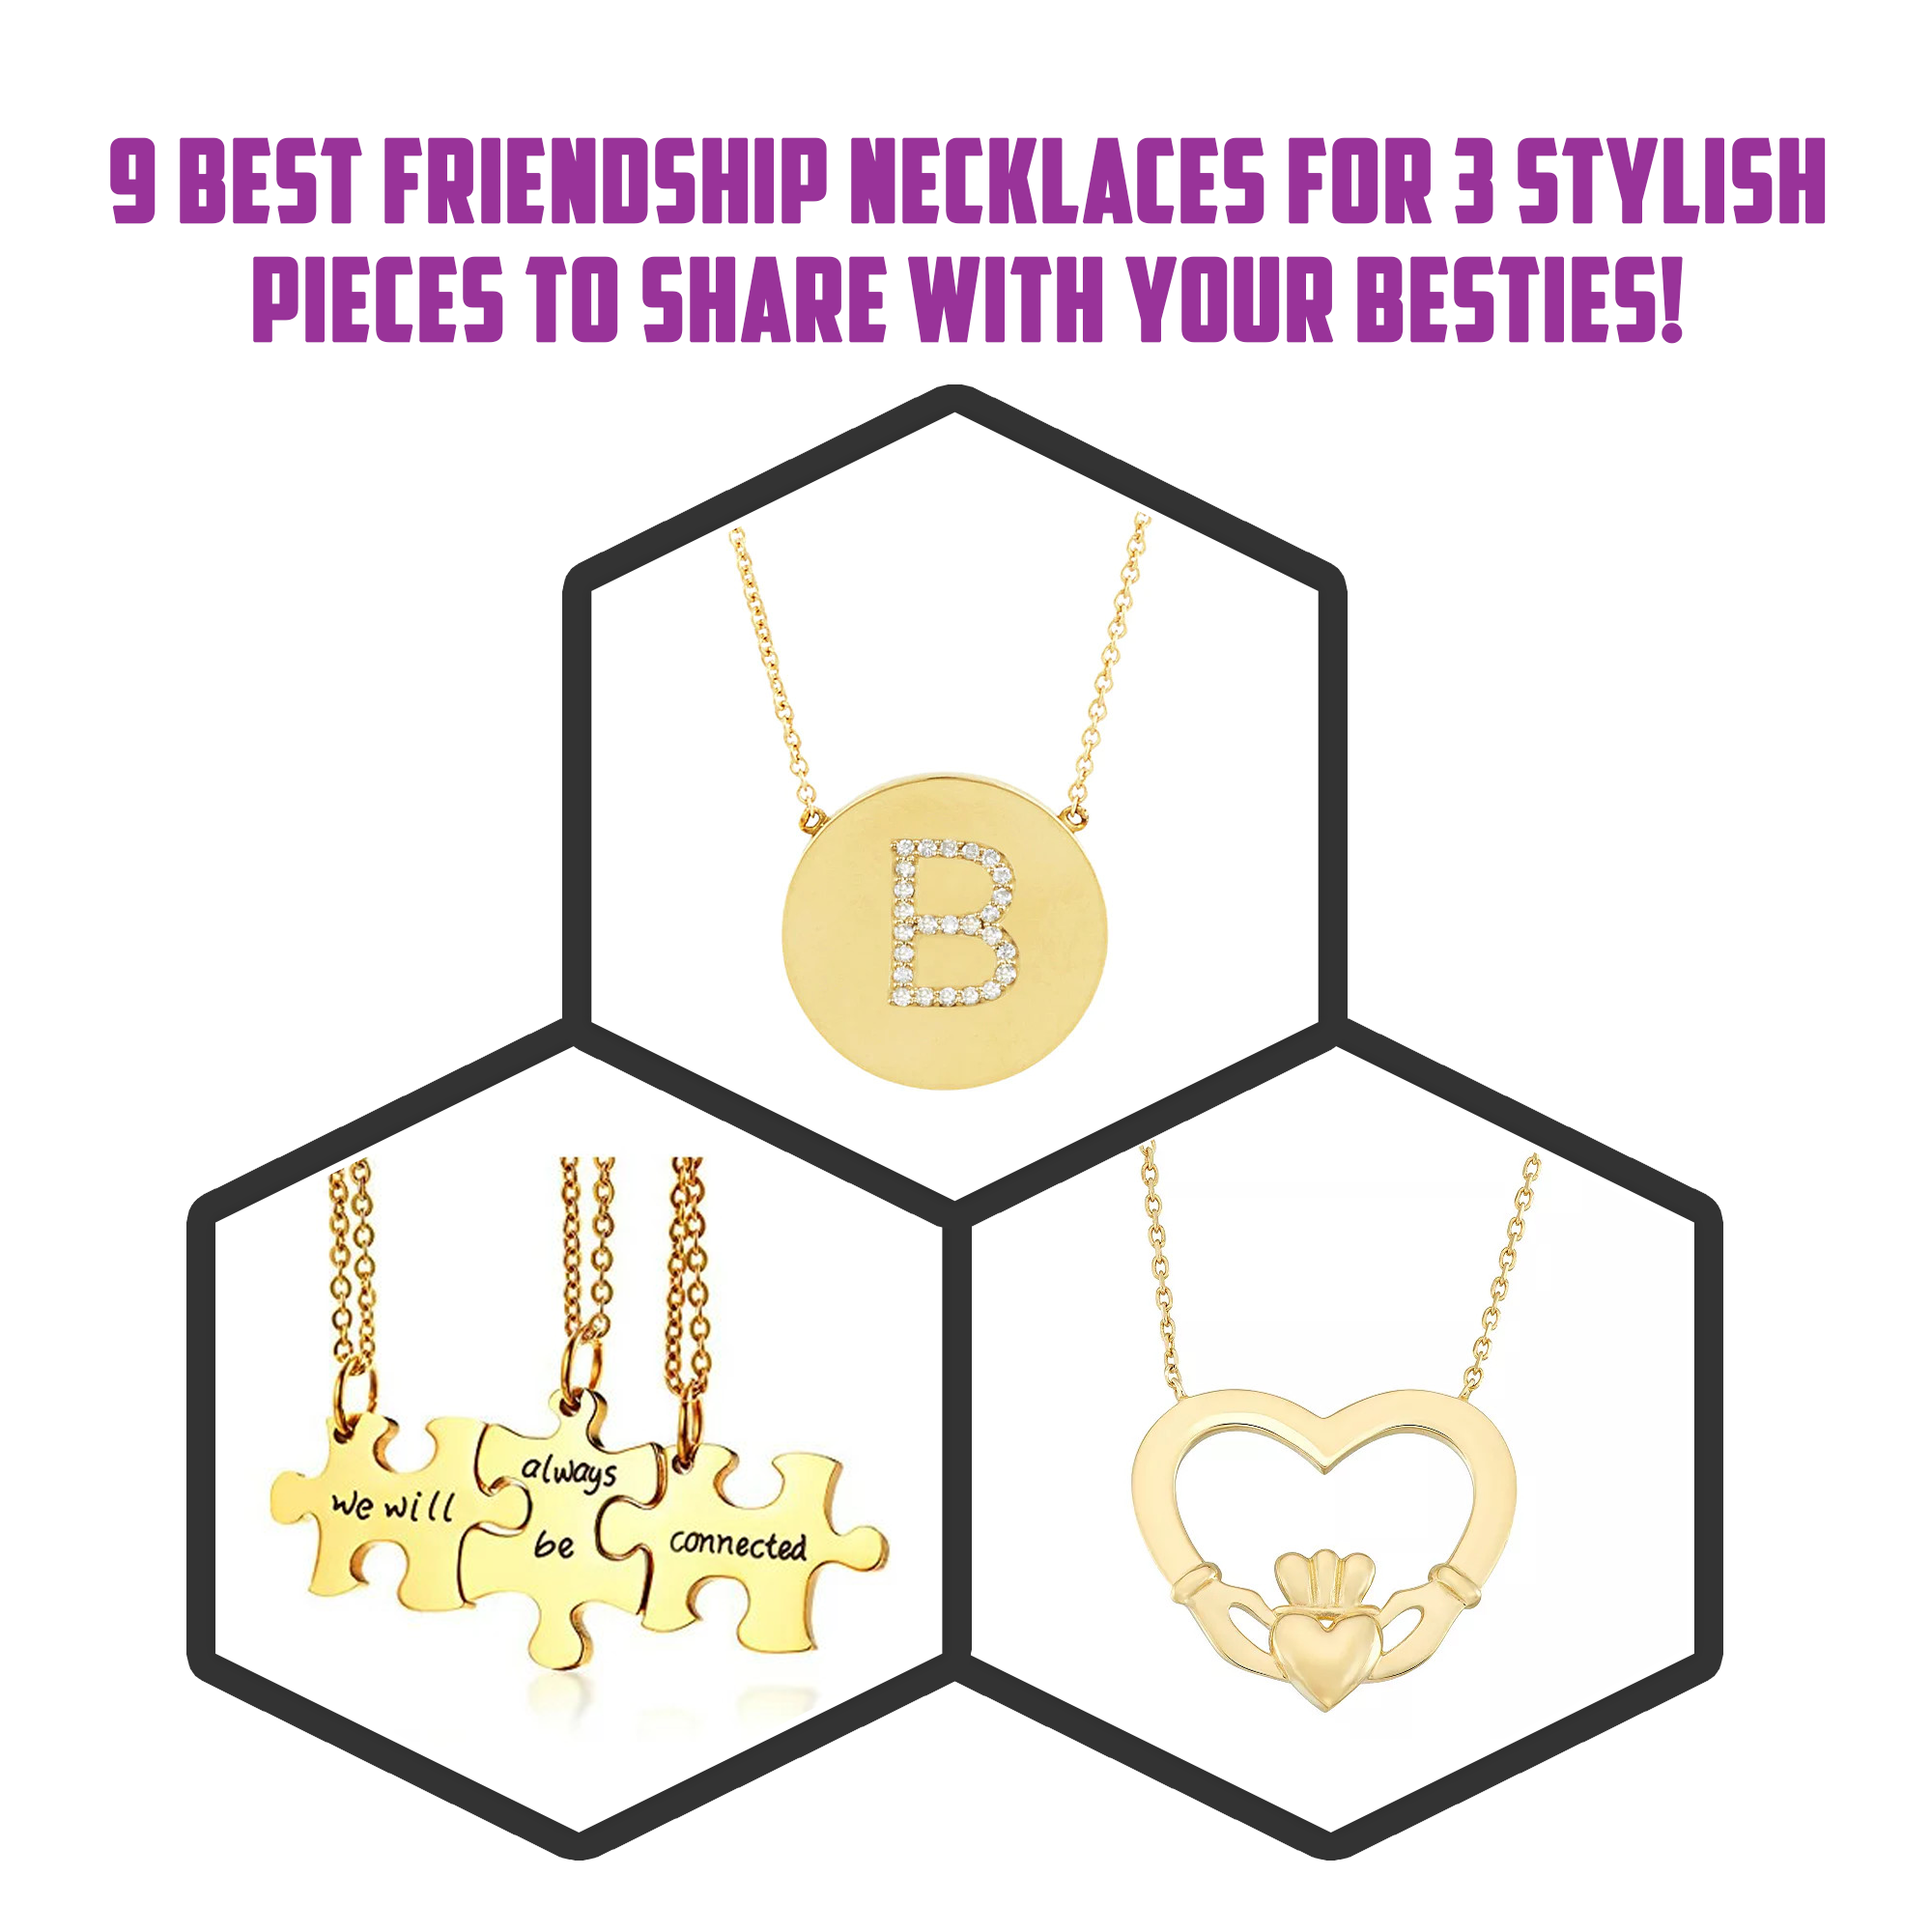 9 Best Friendship Necklaces for 3 Stylish Pieces To Share With Your Besties!